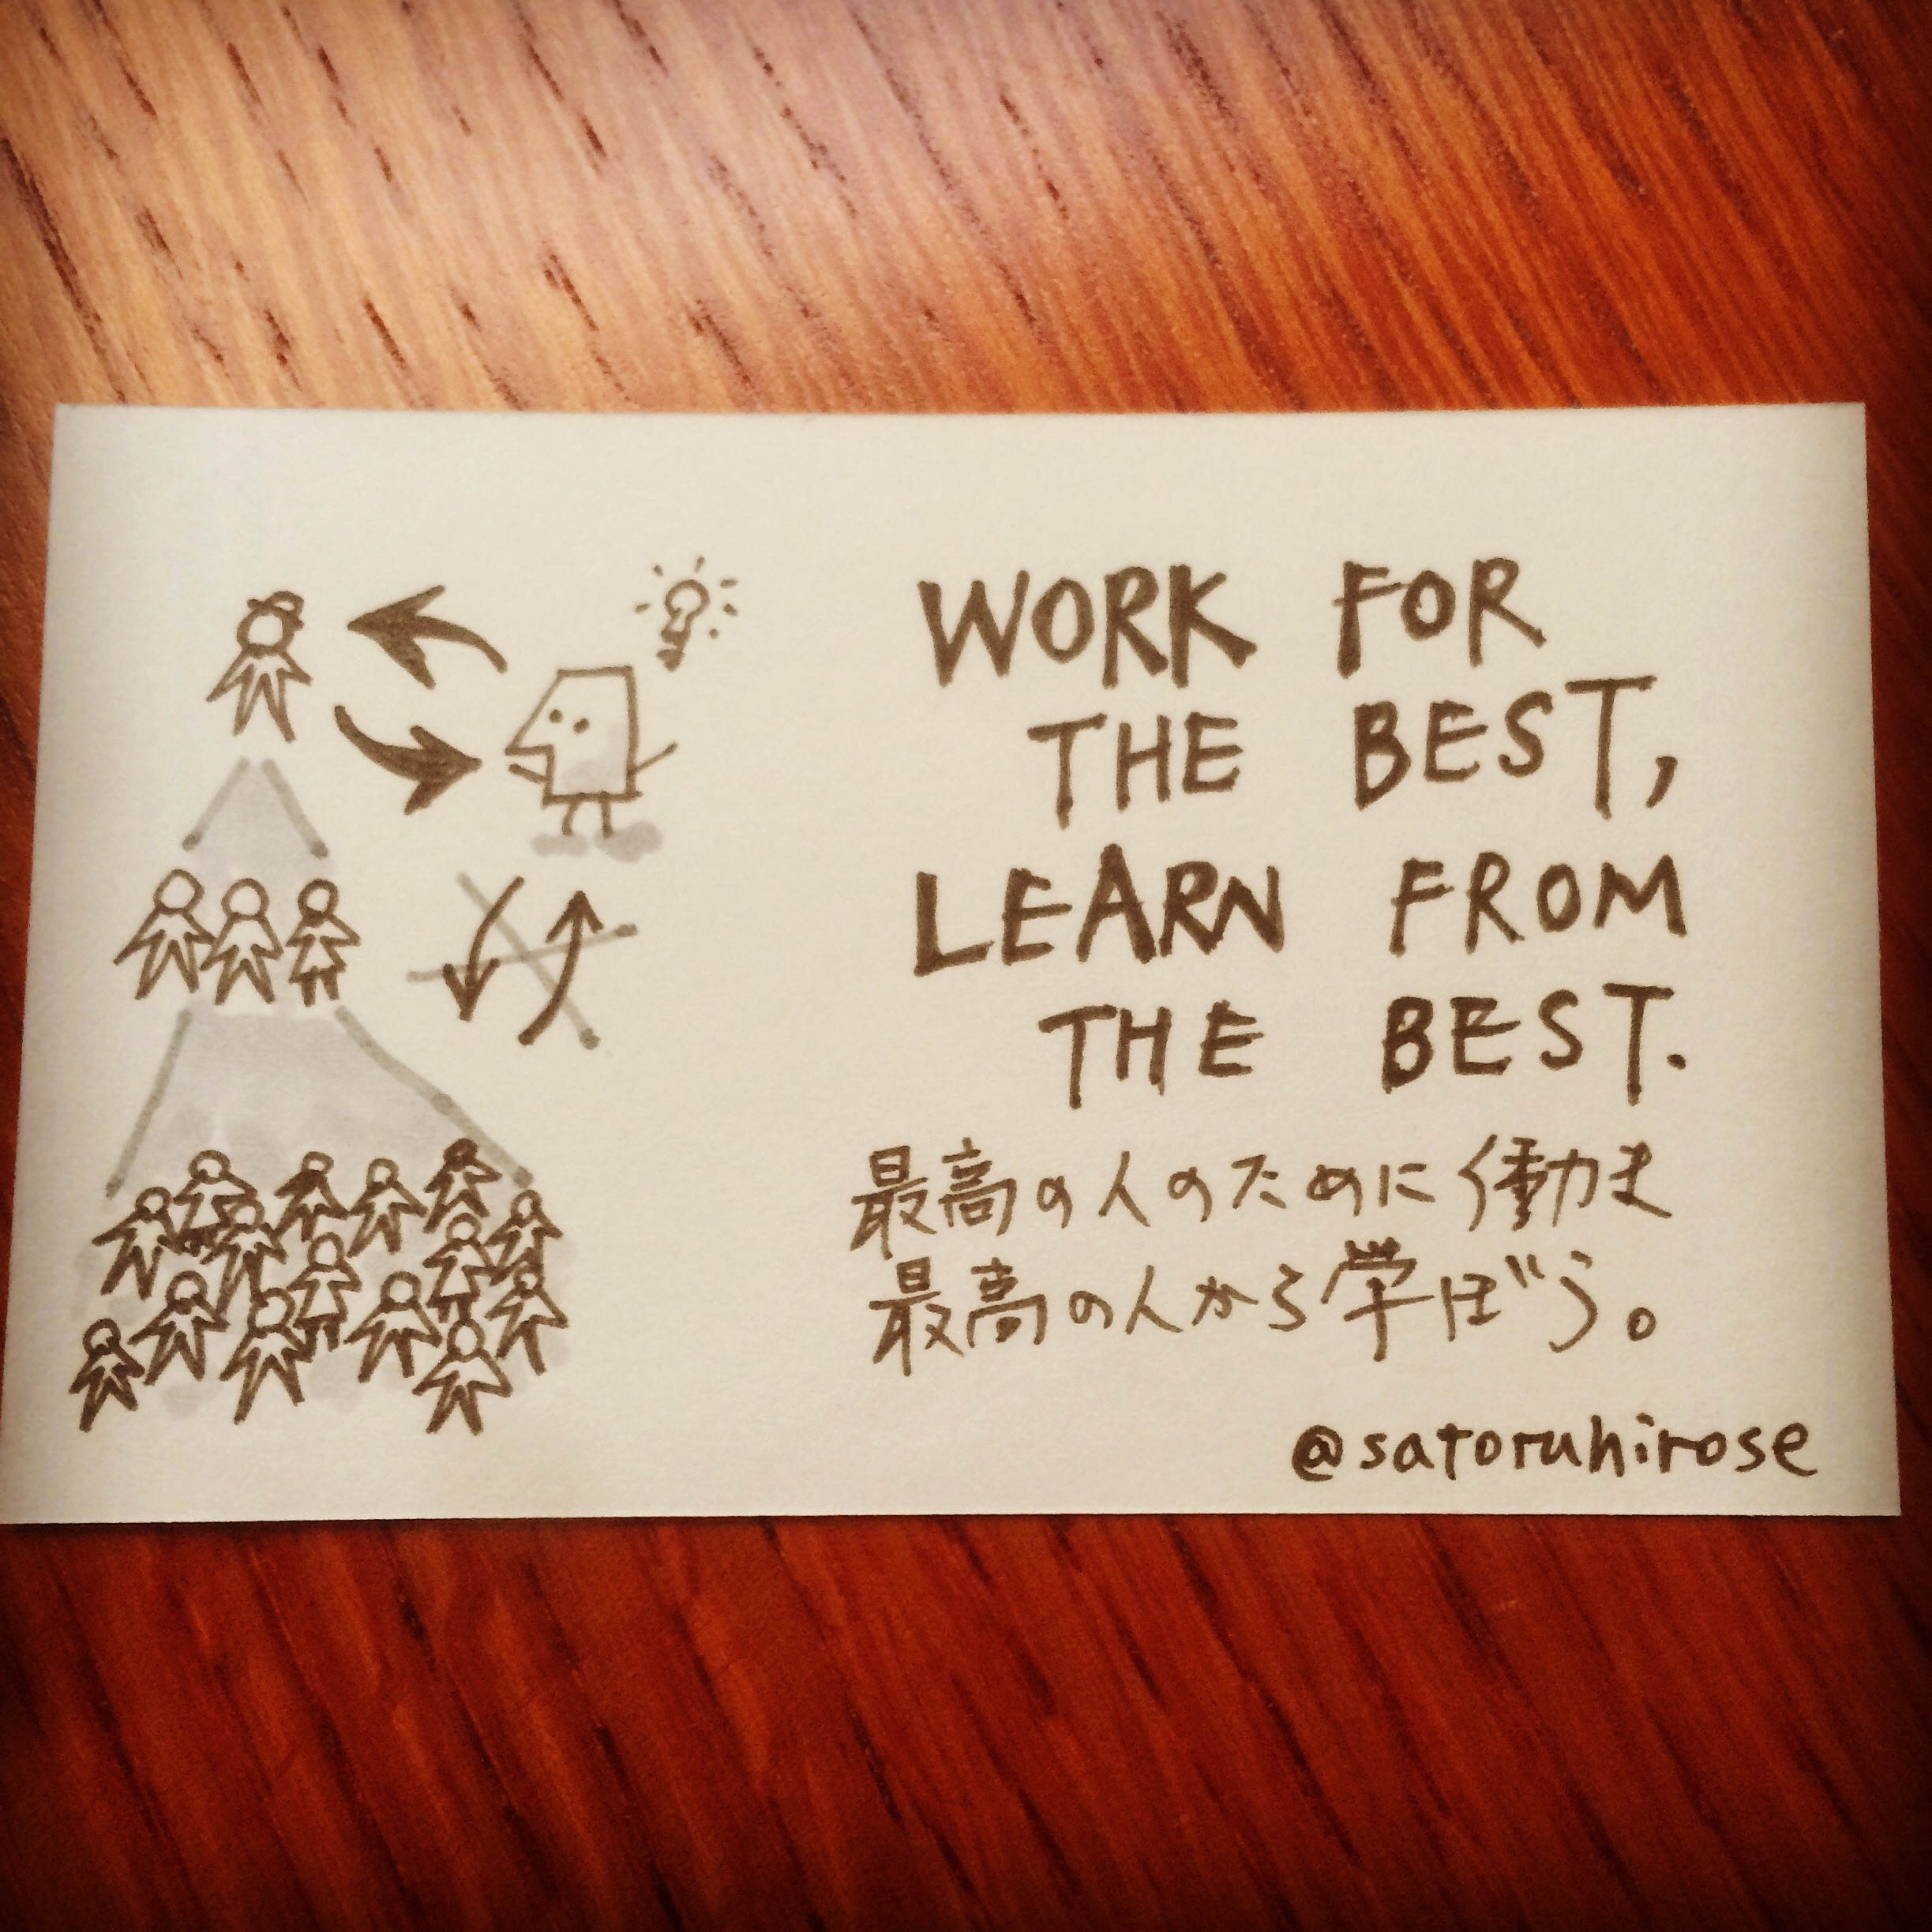 Work for the best, learn from the best.